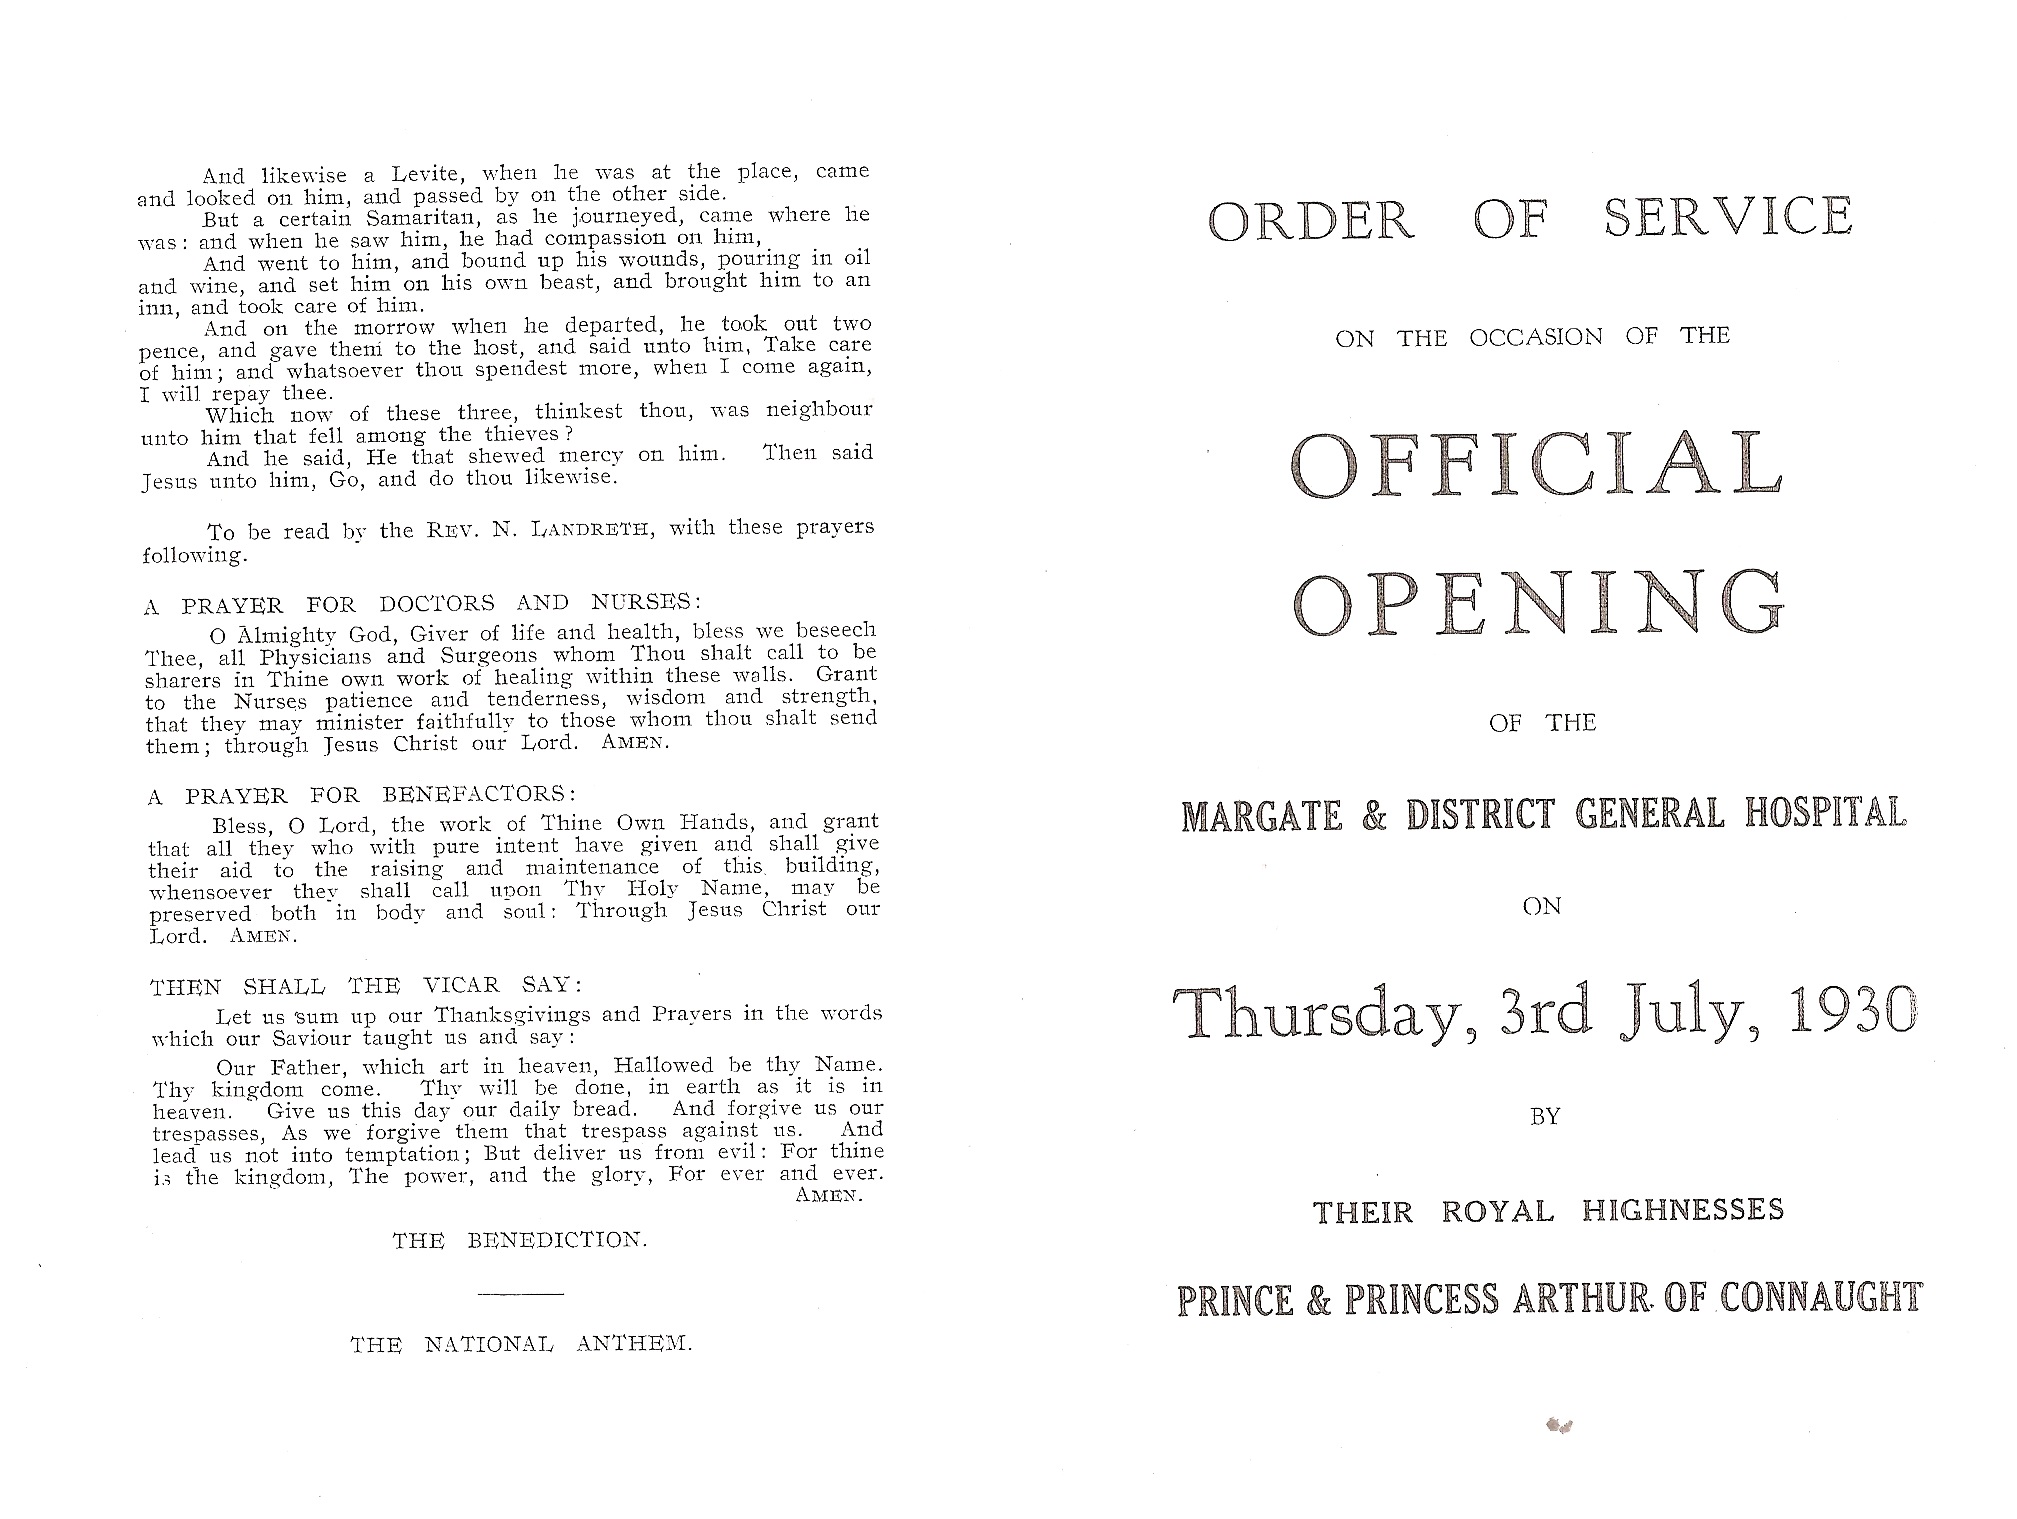 Opening Margate & District General Hospital in 1930